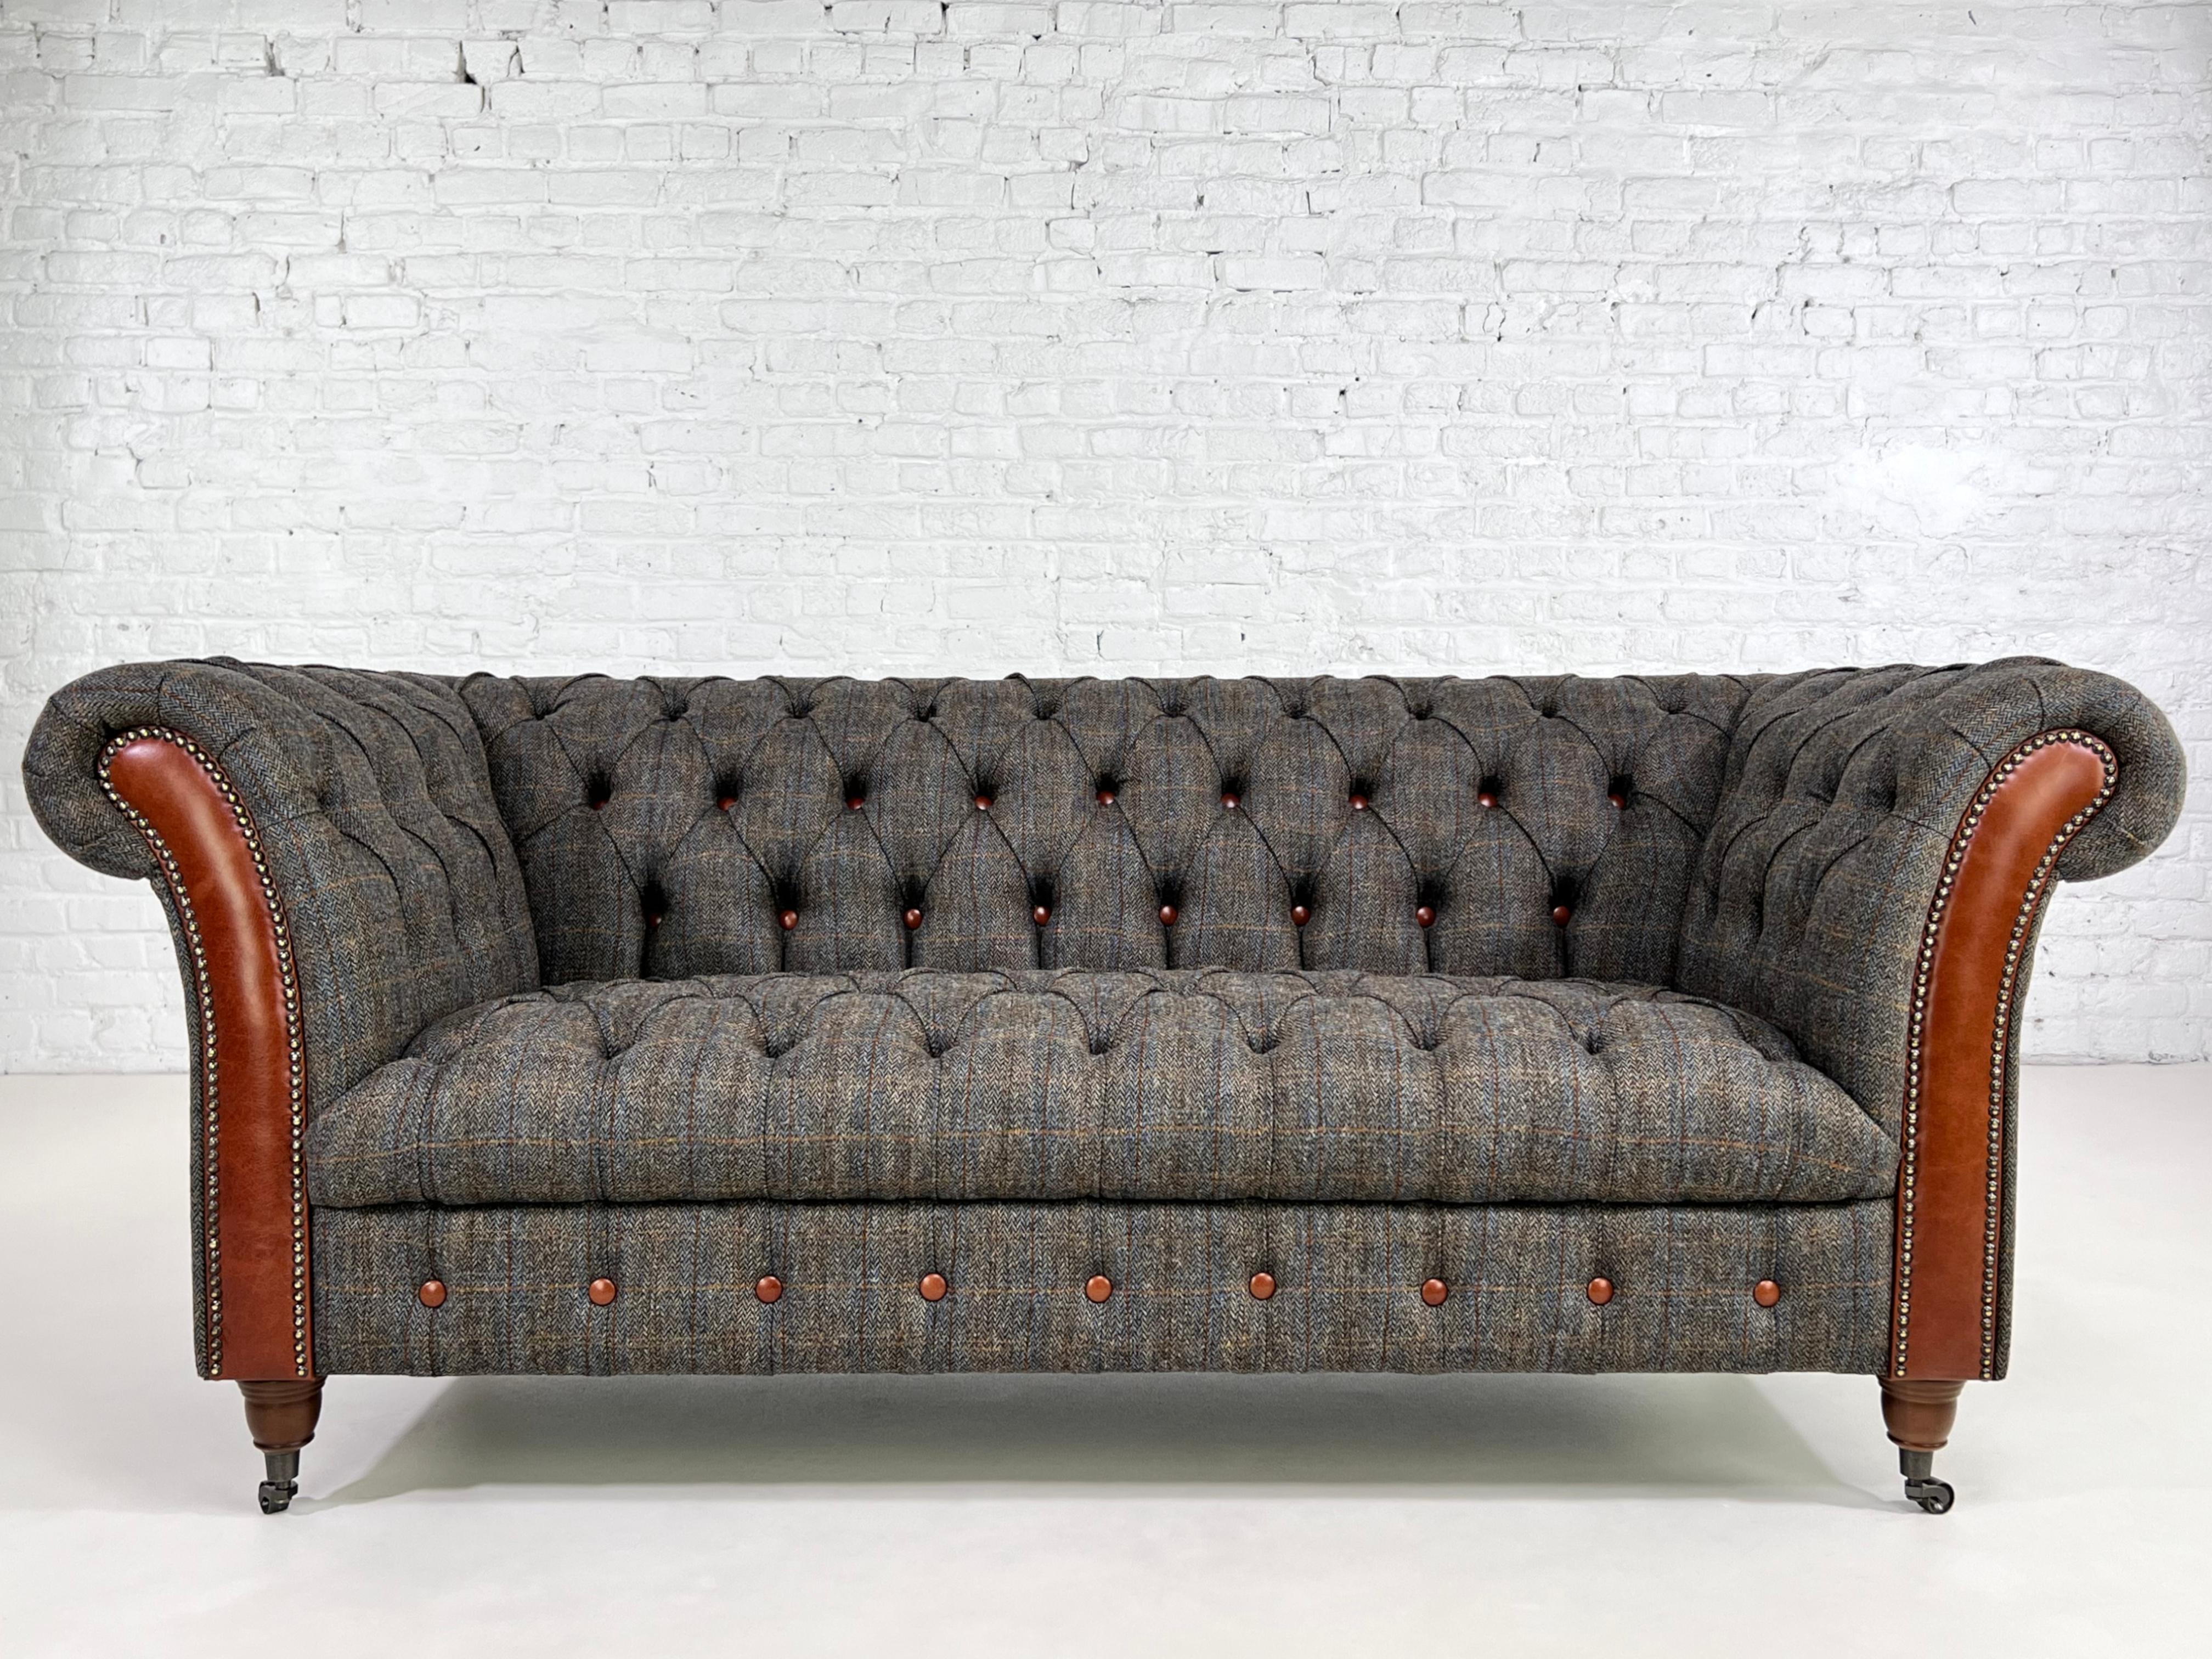 Wool Tweet Fabric With Leather Padded Button Finishes And Wooden Feet Chesterfield Sofa.